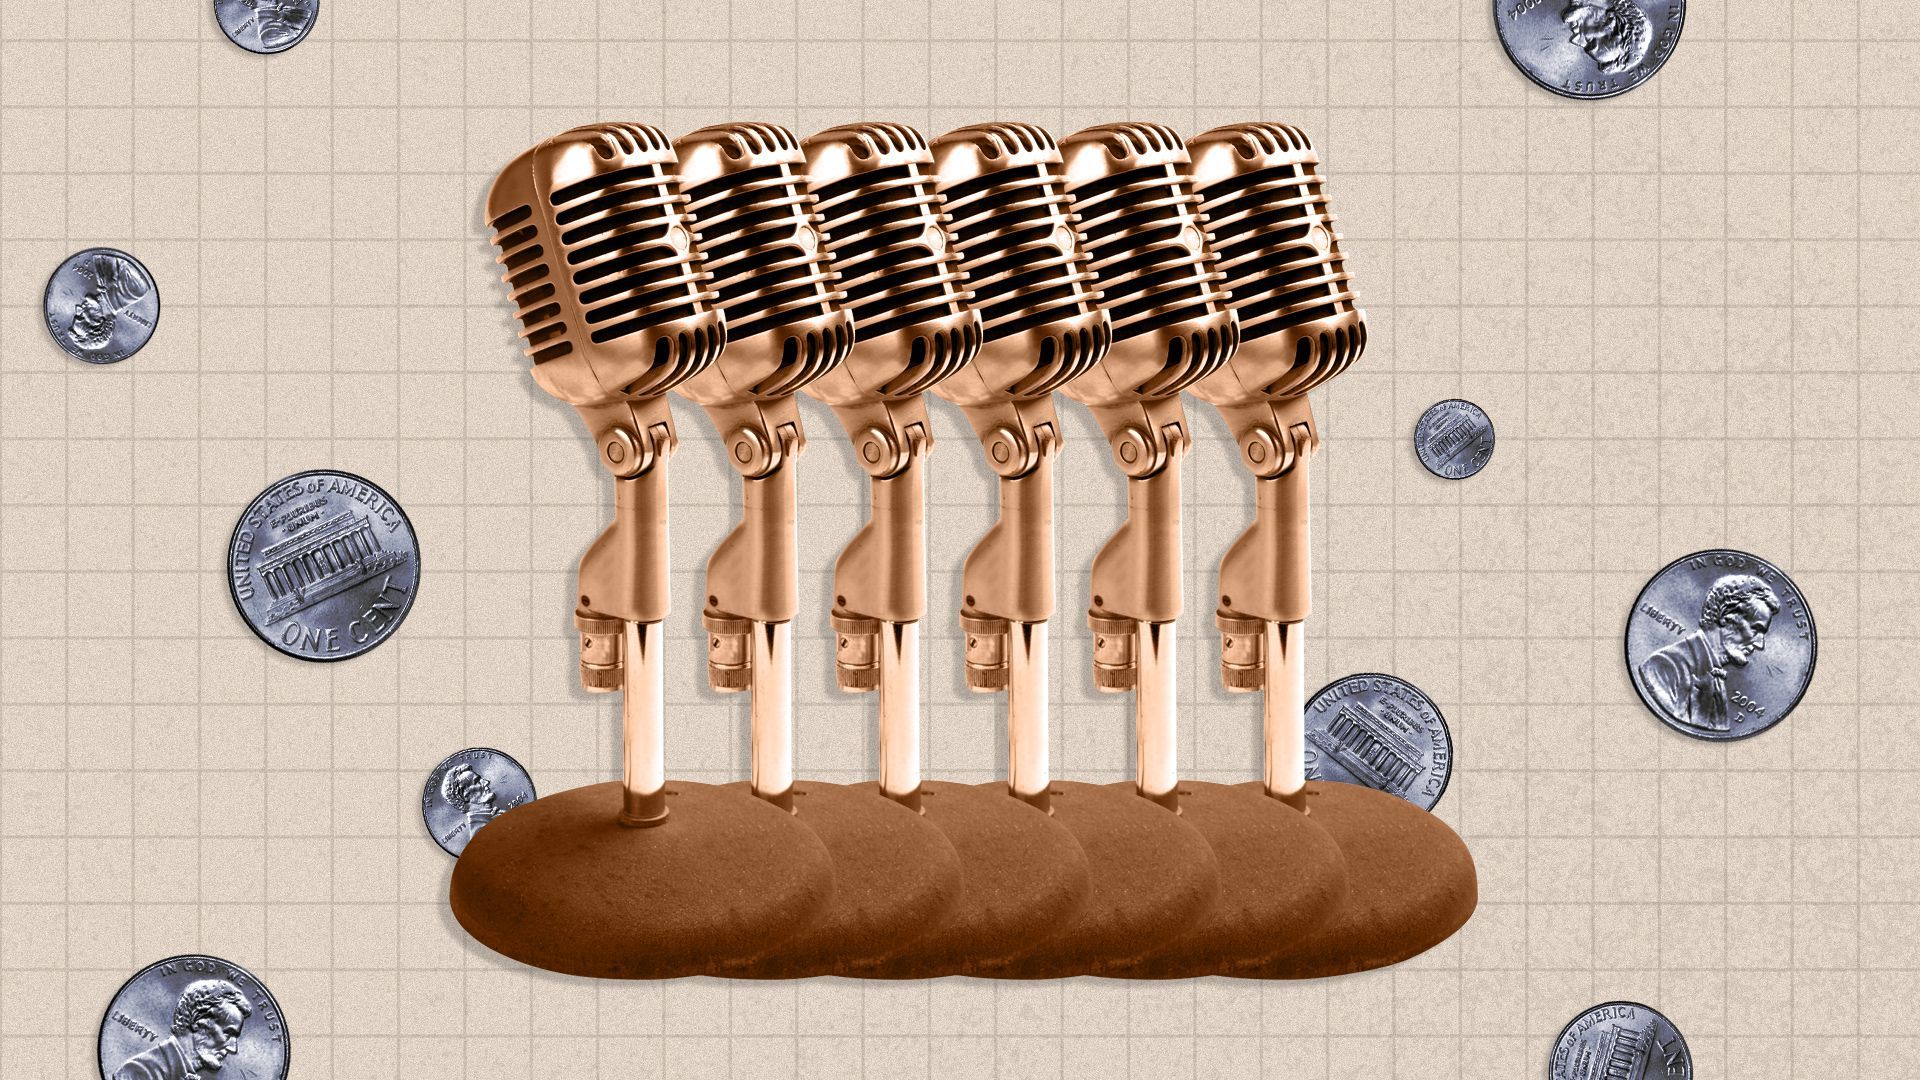 Illustrated collage of a microphone with pennies falling all around.